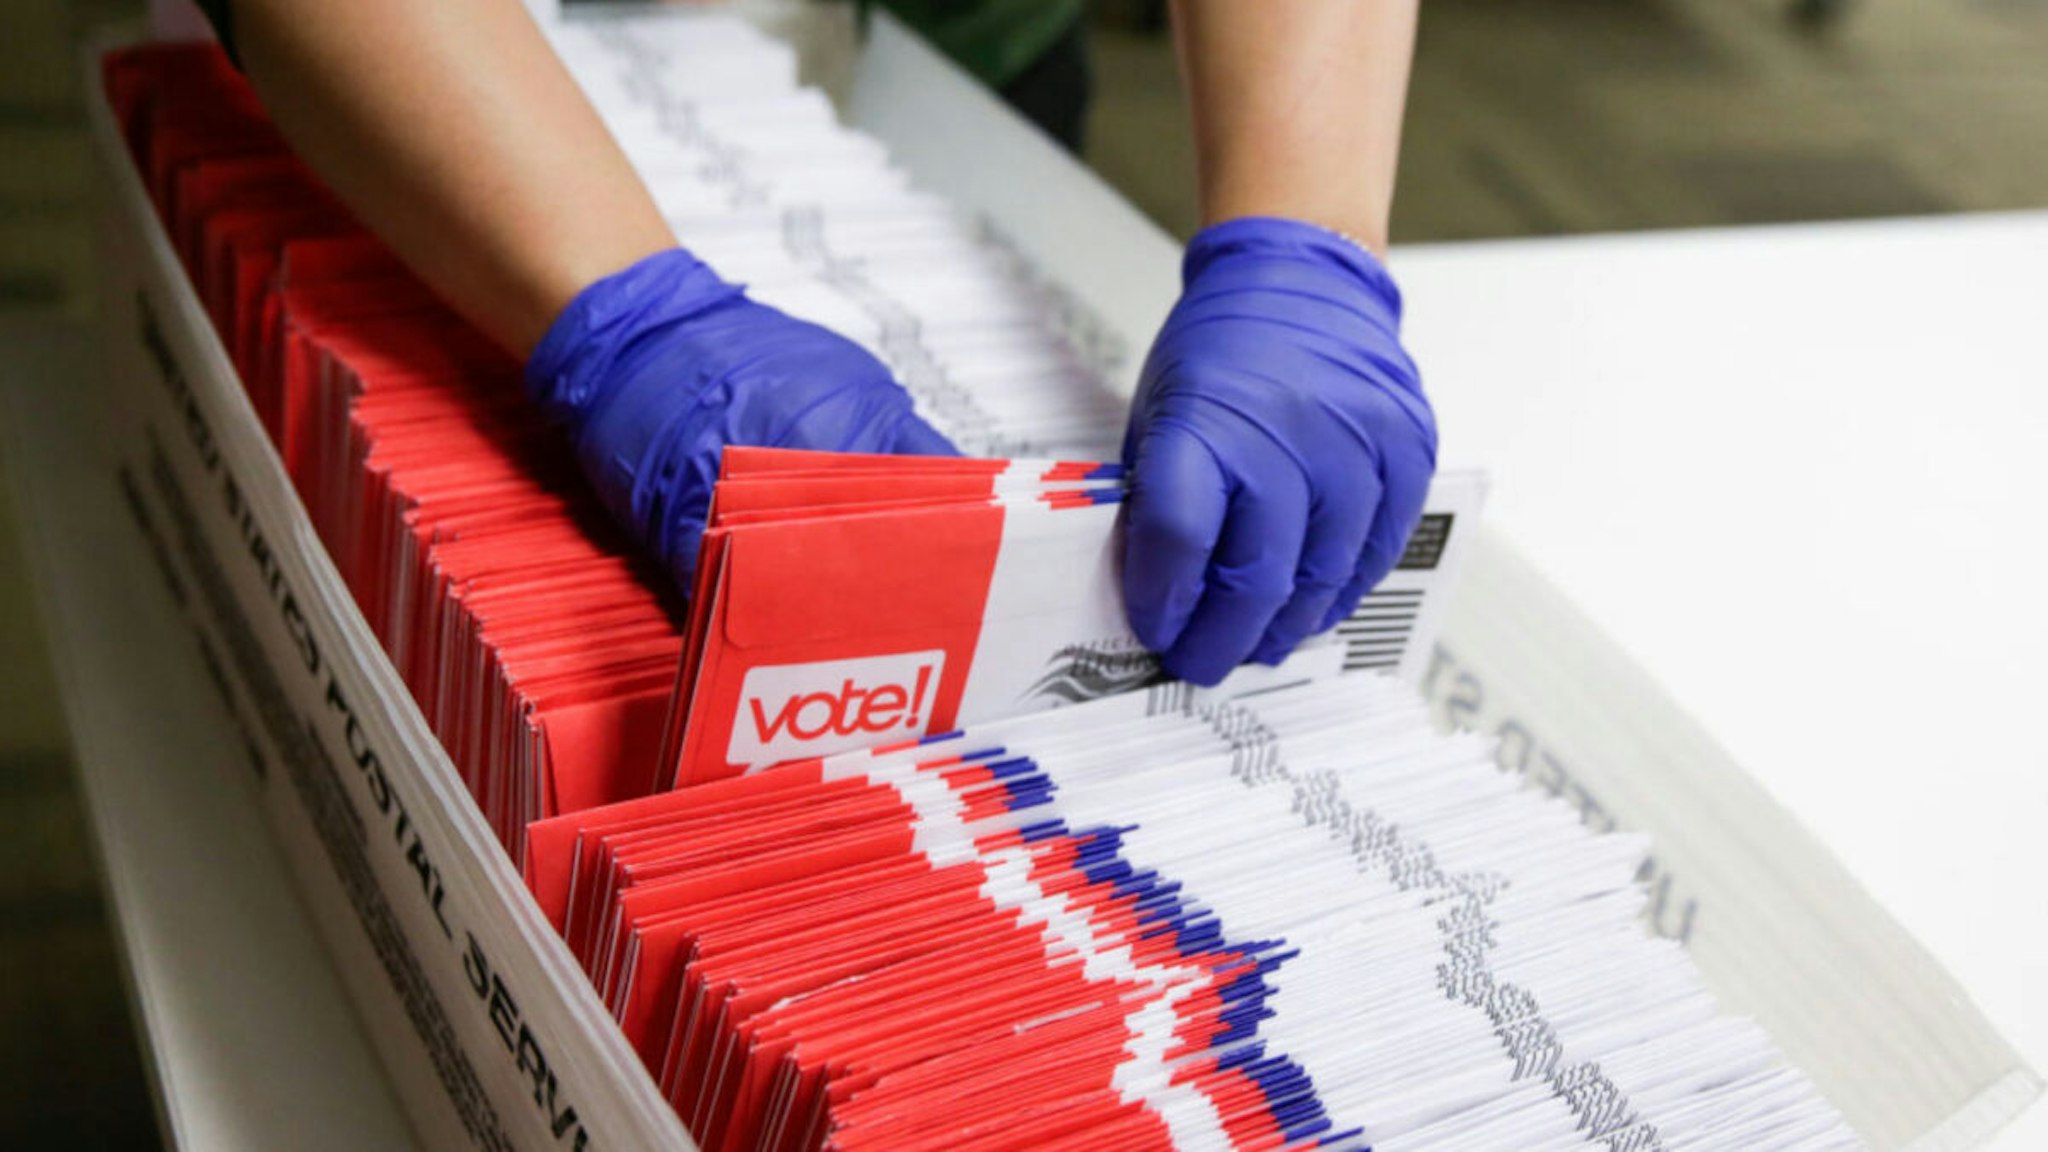 Election workers sort vote-by-mail ballots for the presidential primary at King County Elections in Renton, Washington on March 10, 2020.